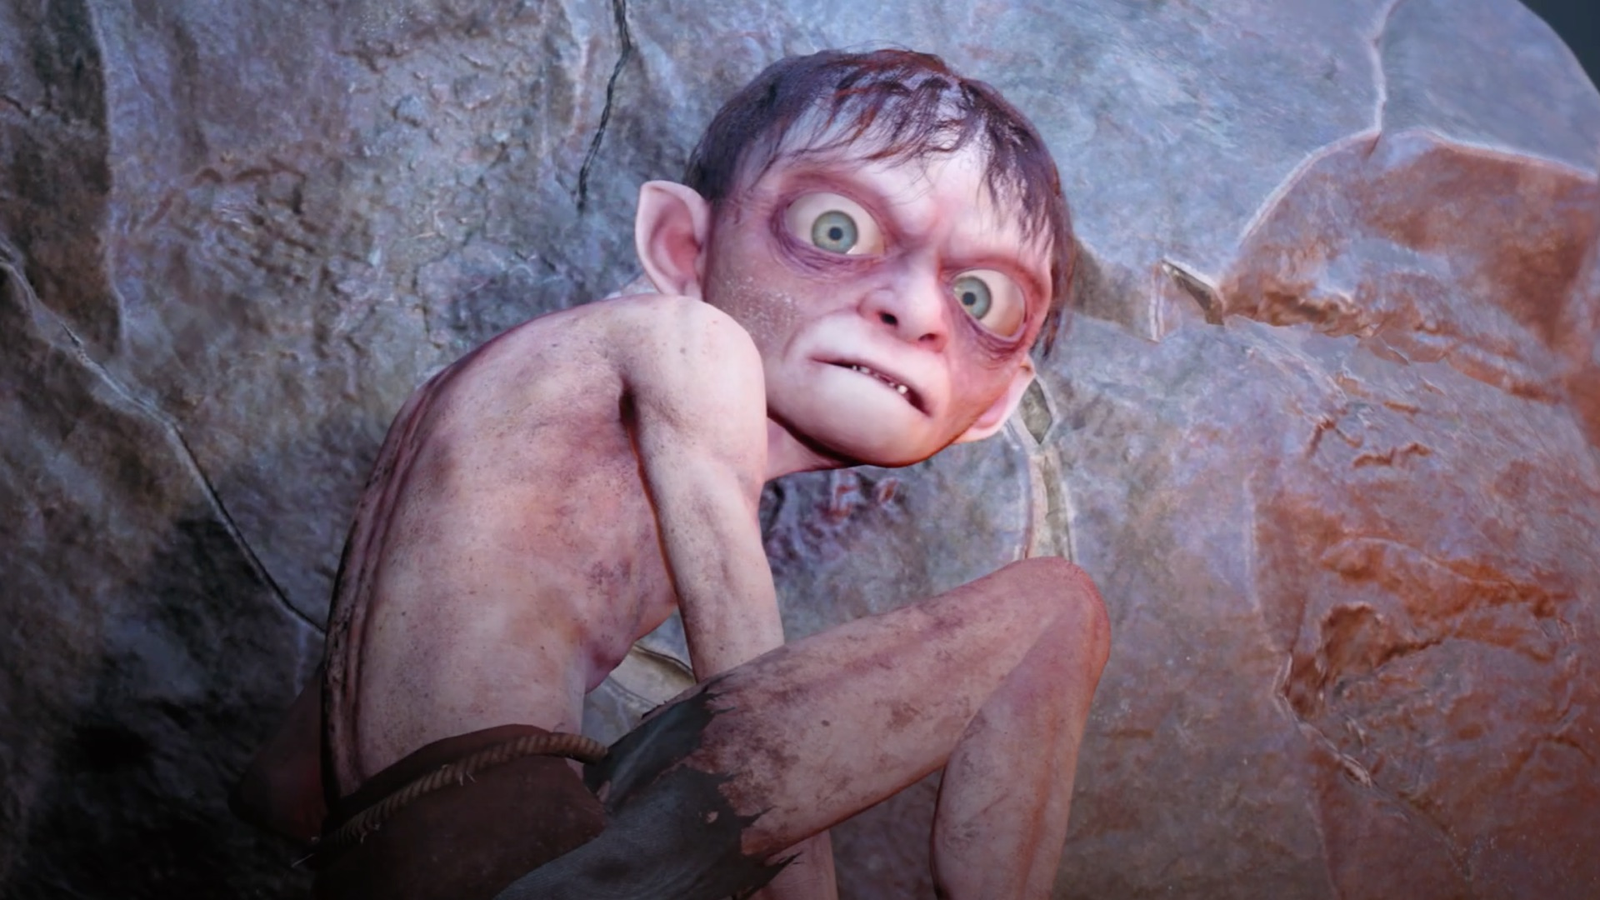 The Lord of the Rings: Gollum taps into Prince of Persia's stealth